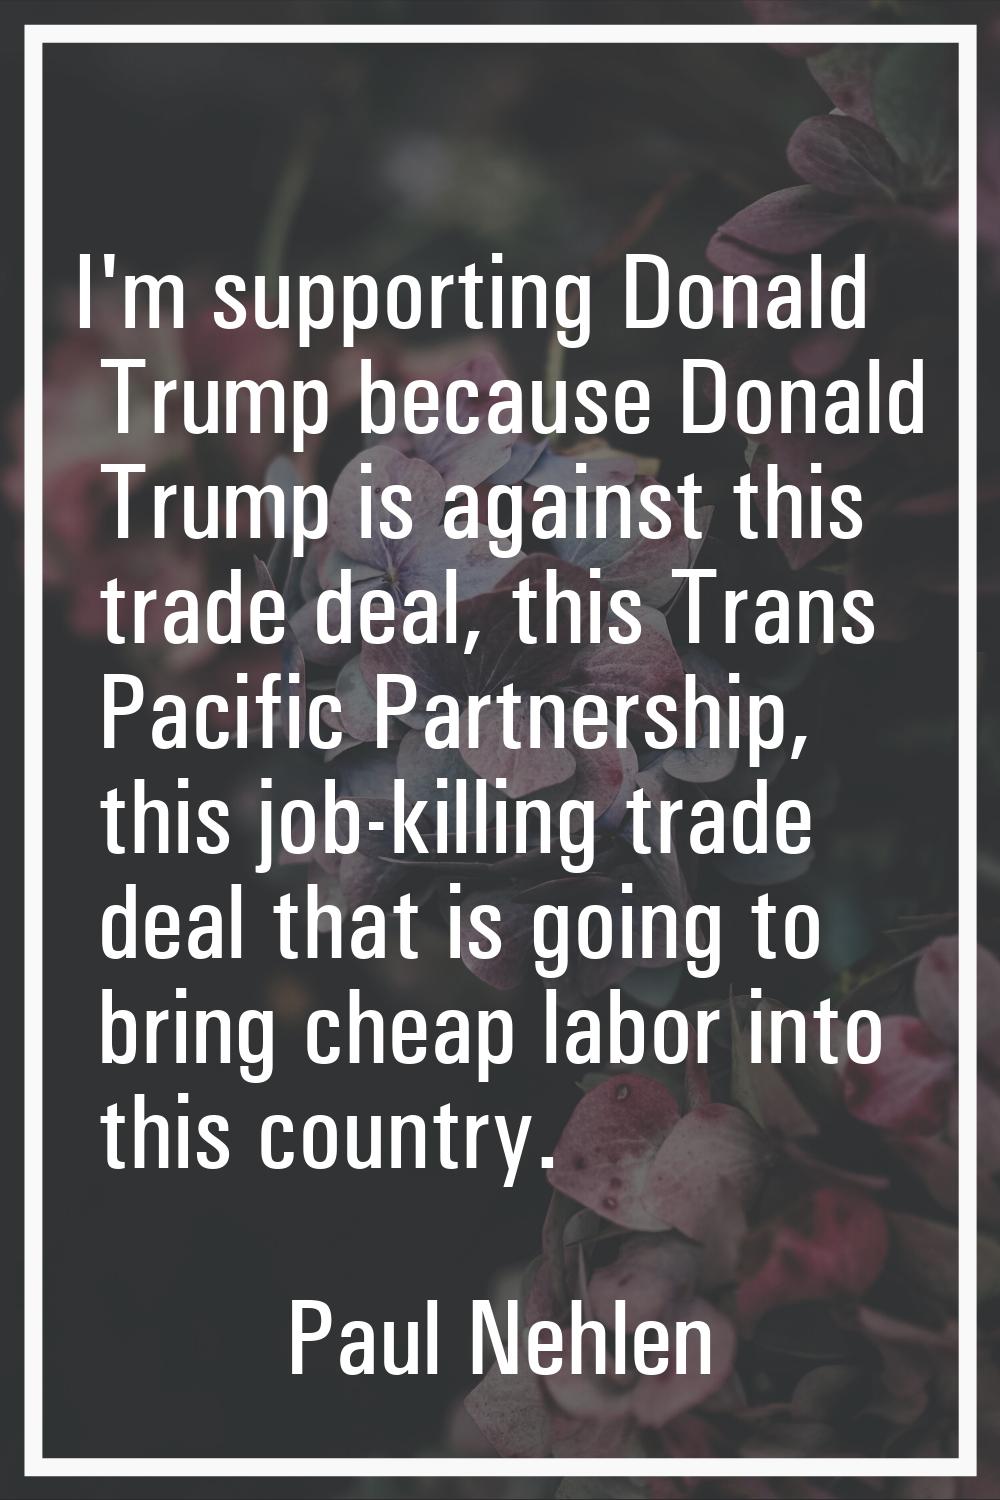 I'm supporting Donald Trump because Donald Trump is against this trade deal, this Trans Pacific Par